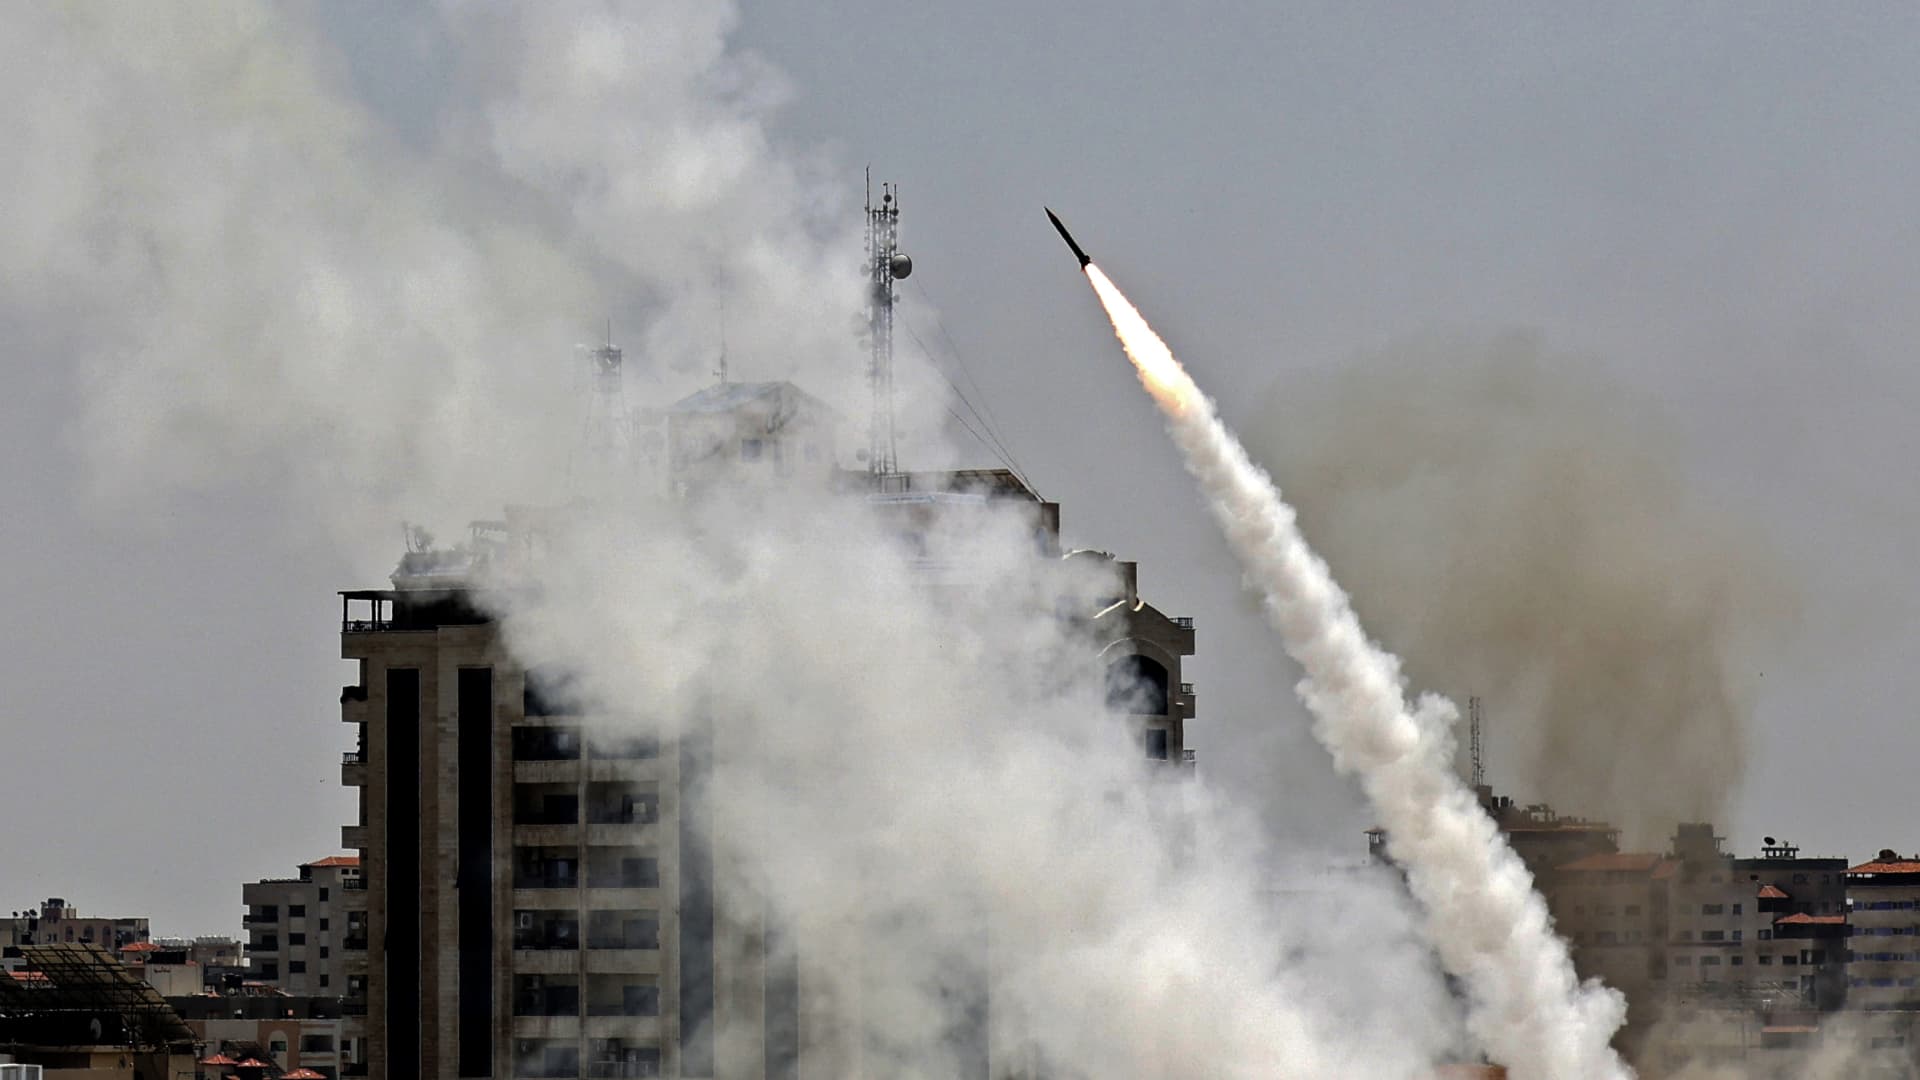 Rockets are fired from Gaza City, controlled by the Palestinian Hamas movement, toward Israel on May 11, 2021.